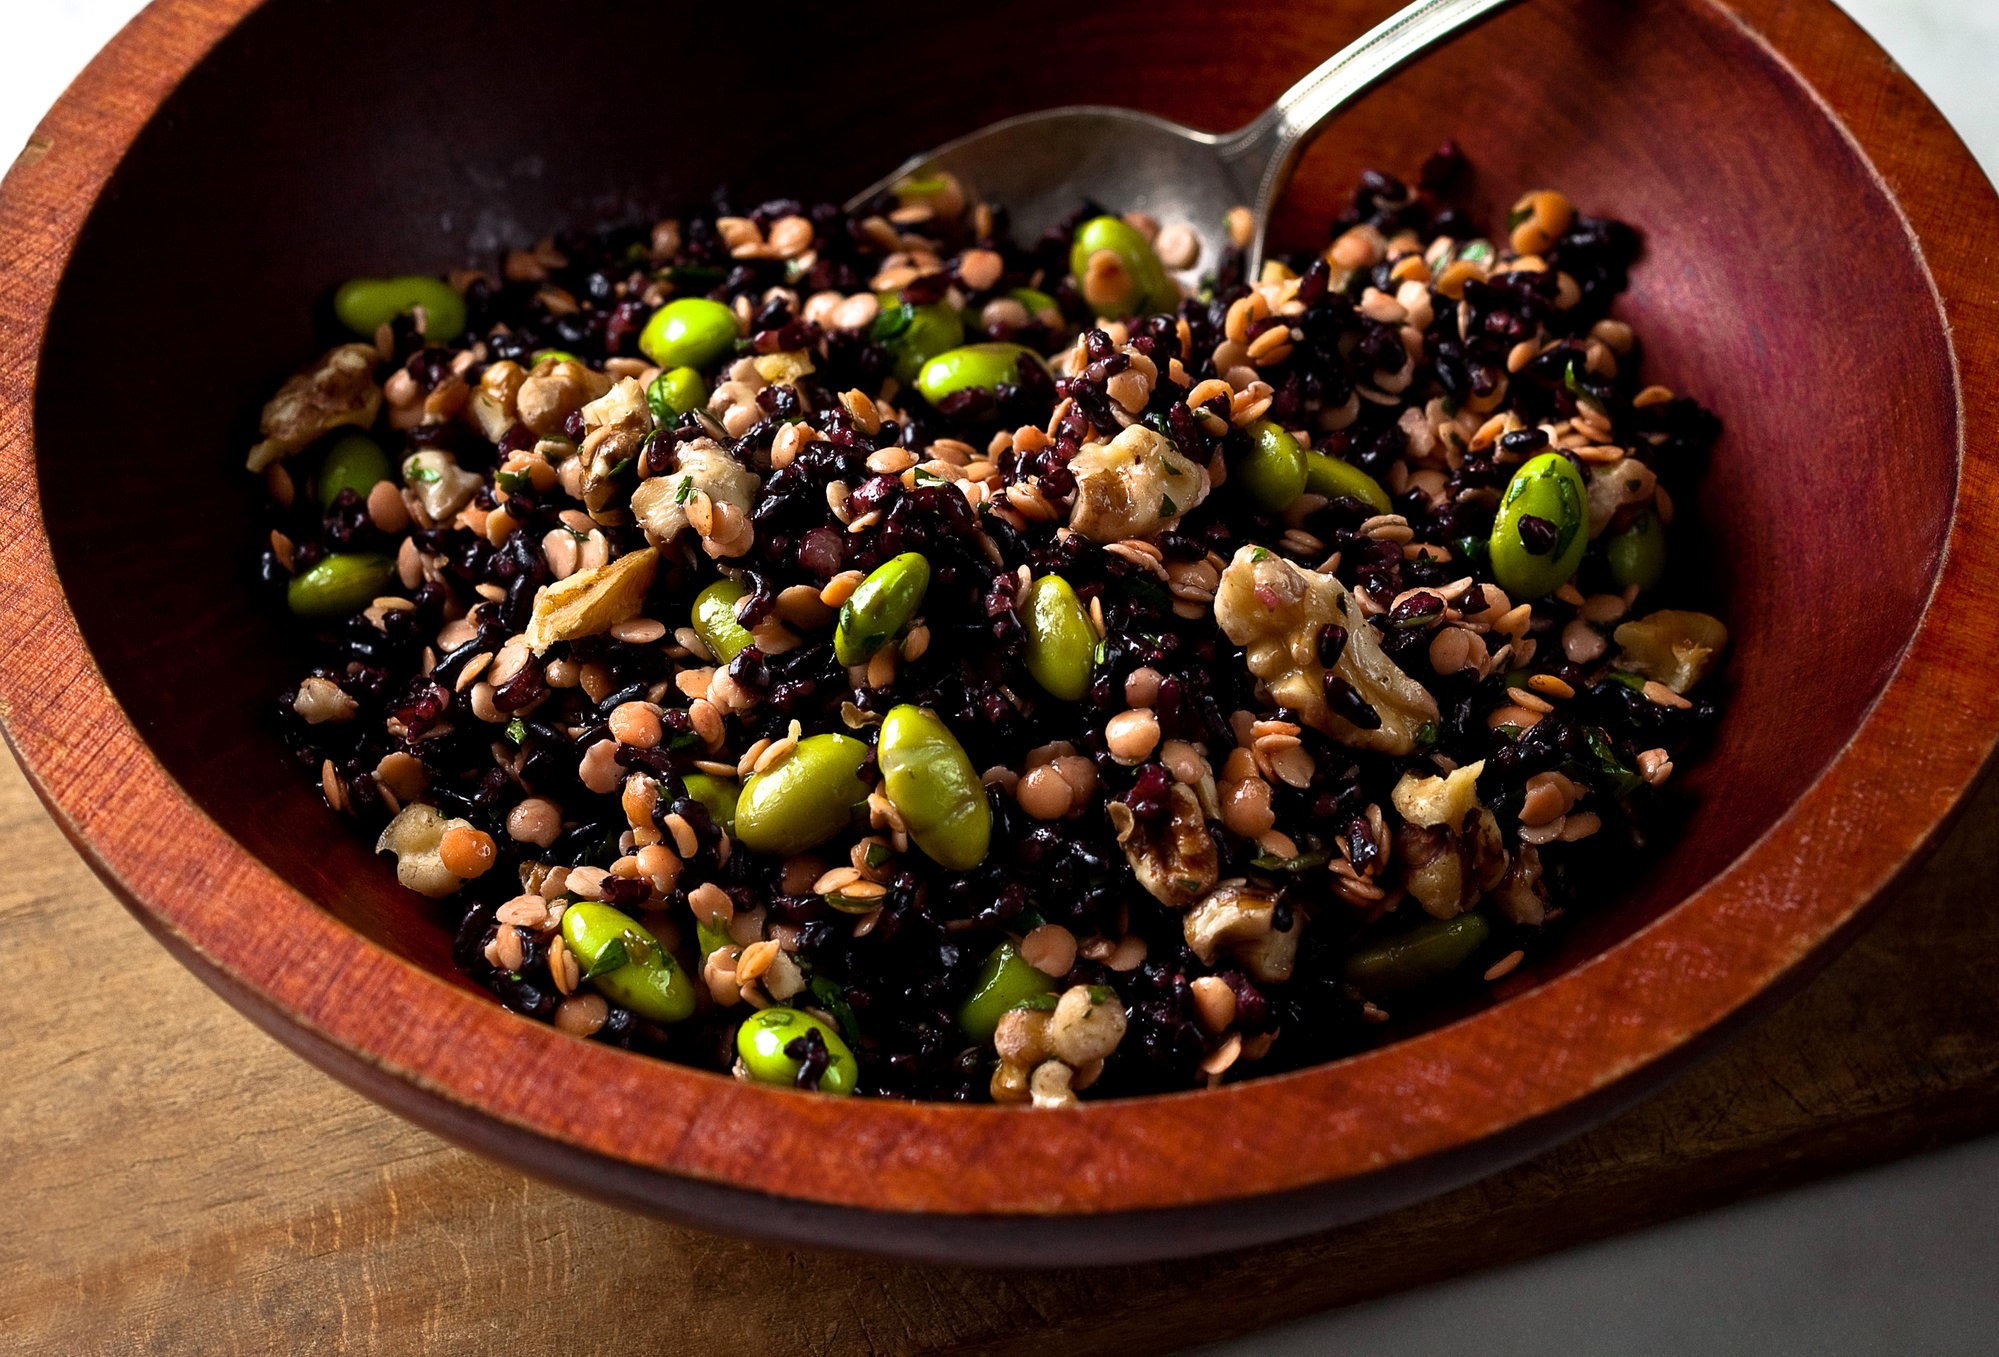 American Black Rice and Red Lentil Salad Recipe 1 Appetizer